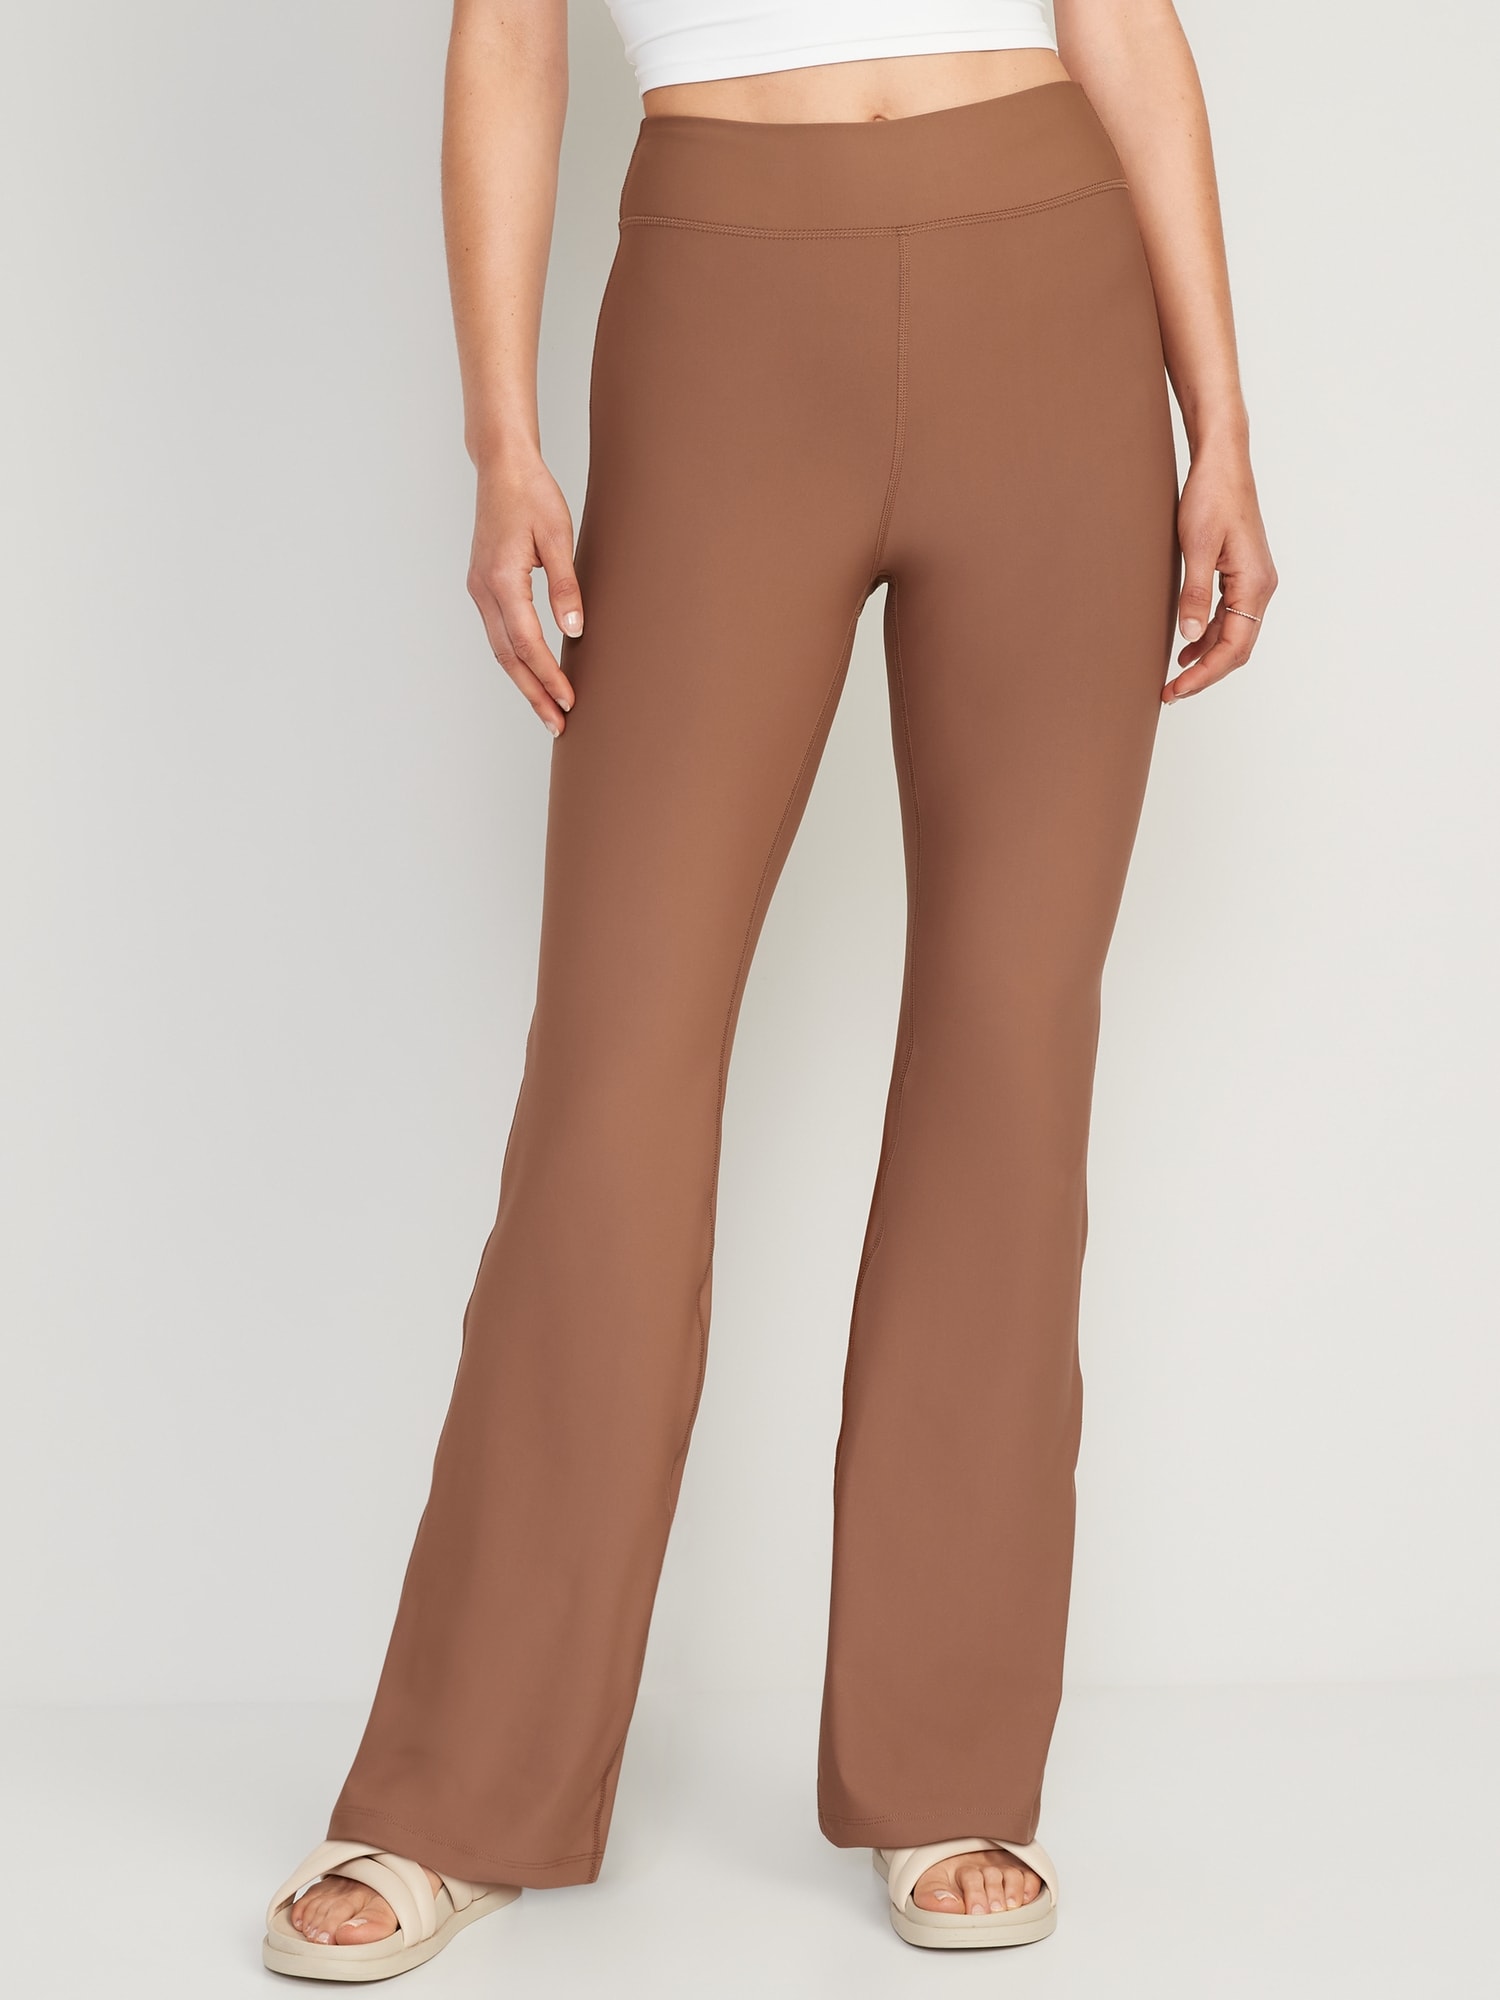 Old Navy Extra High-Waisted PowerSoft Flare Pants for Women brown. 1